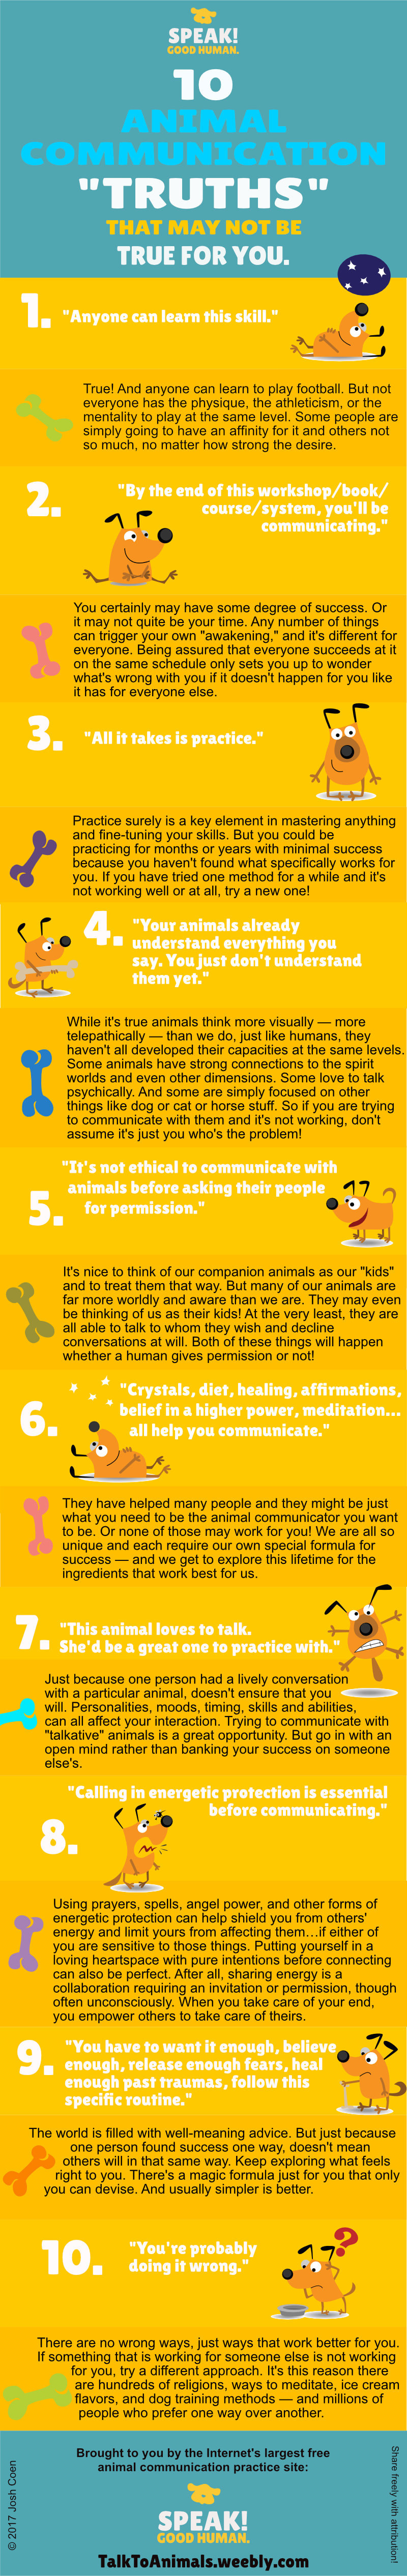 Infographic on 10 animal communication truths that may not be true for you